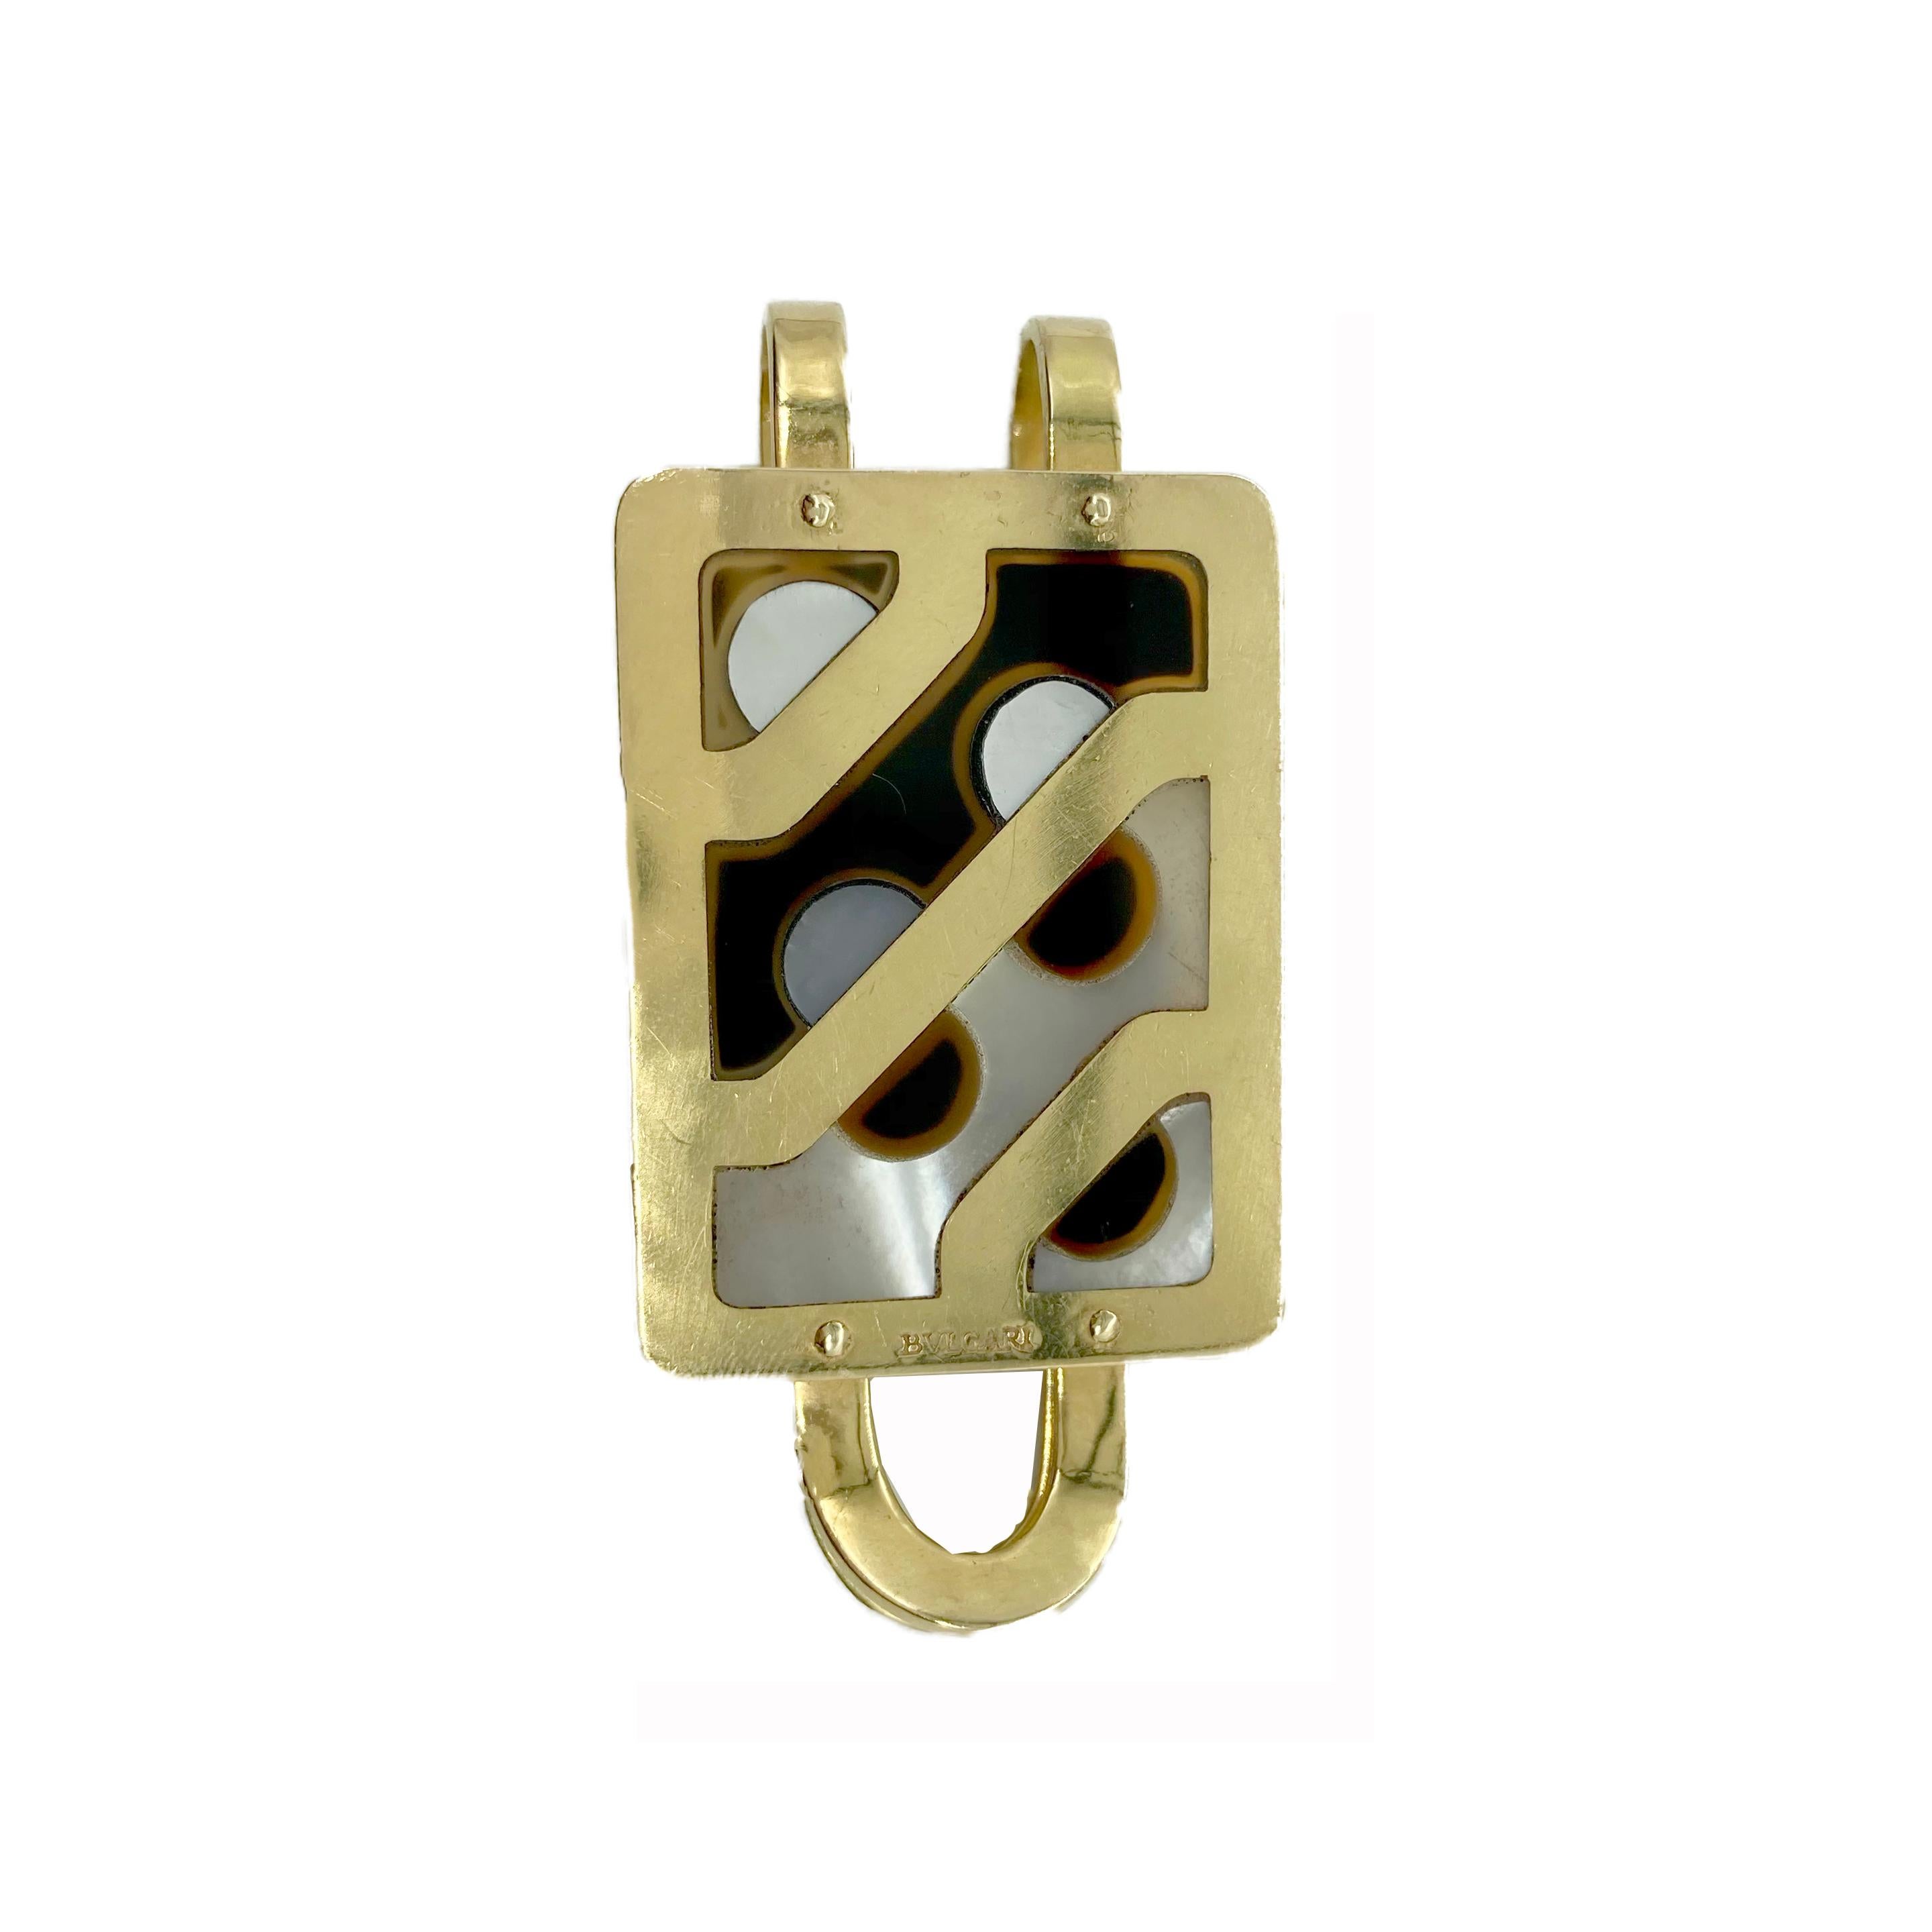 A sophisticated mother of pearl and onyx money clip by Bulgari. Made in Italy, 18 karat gold.